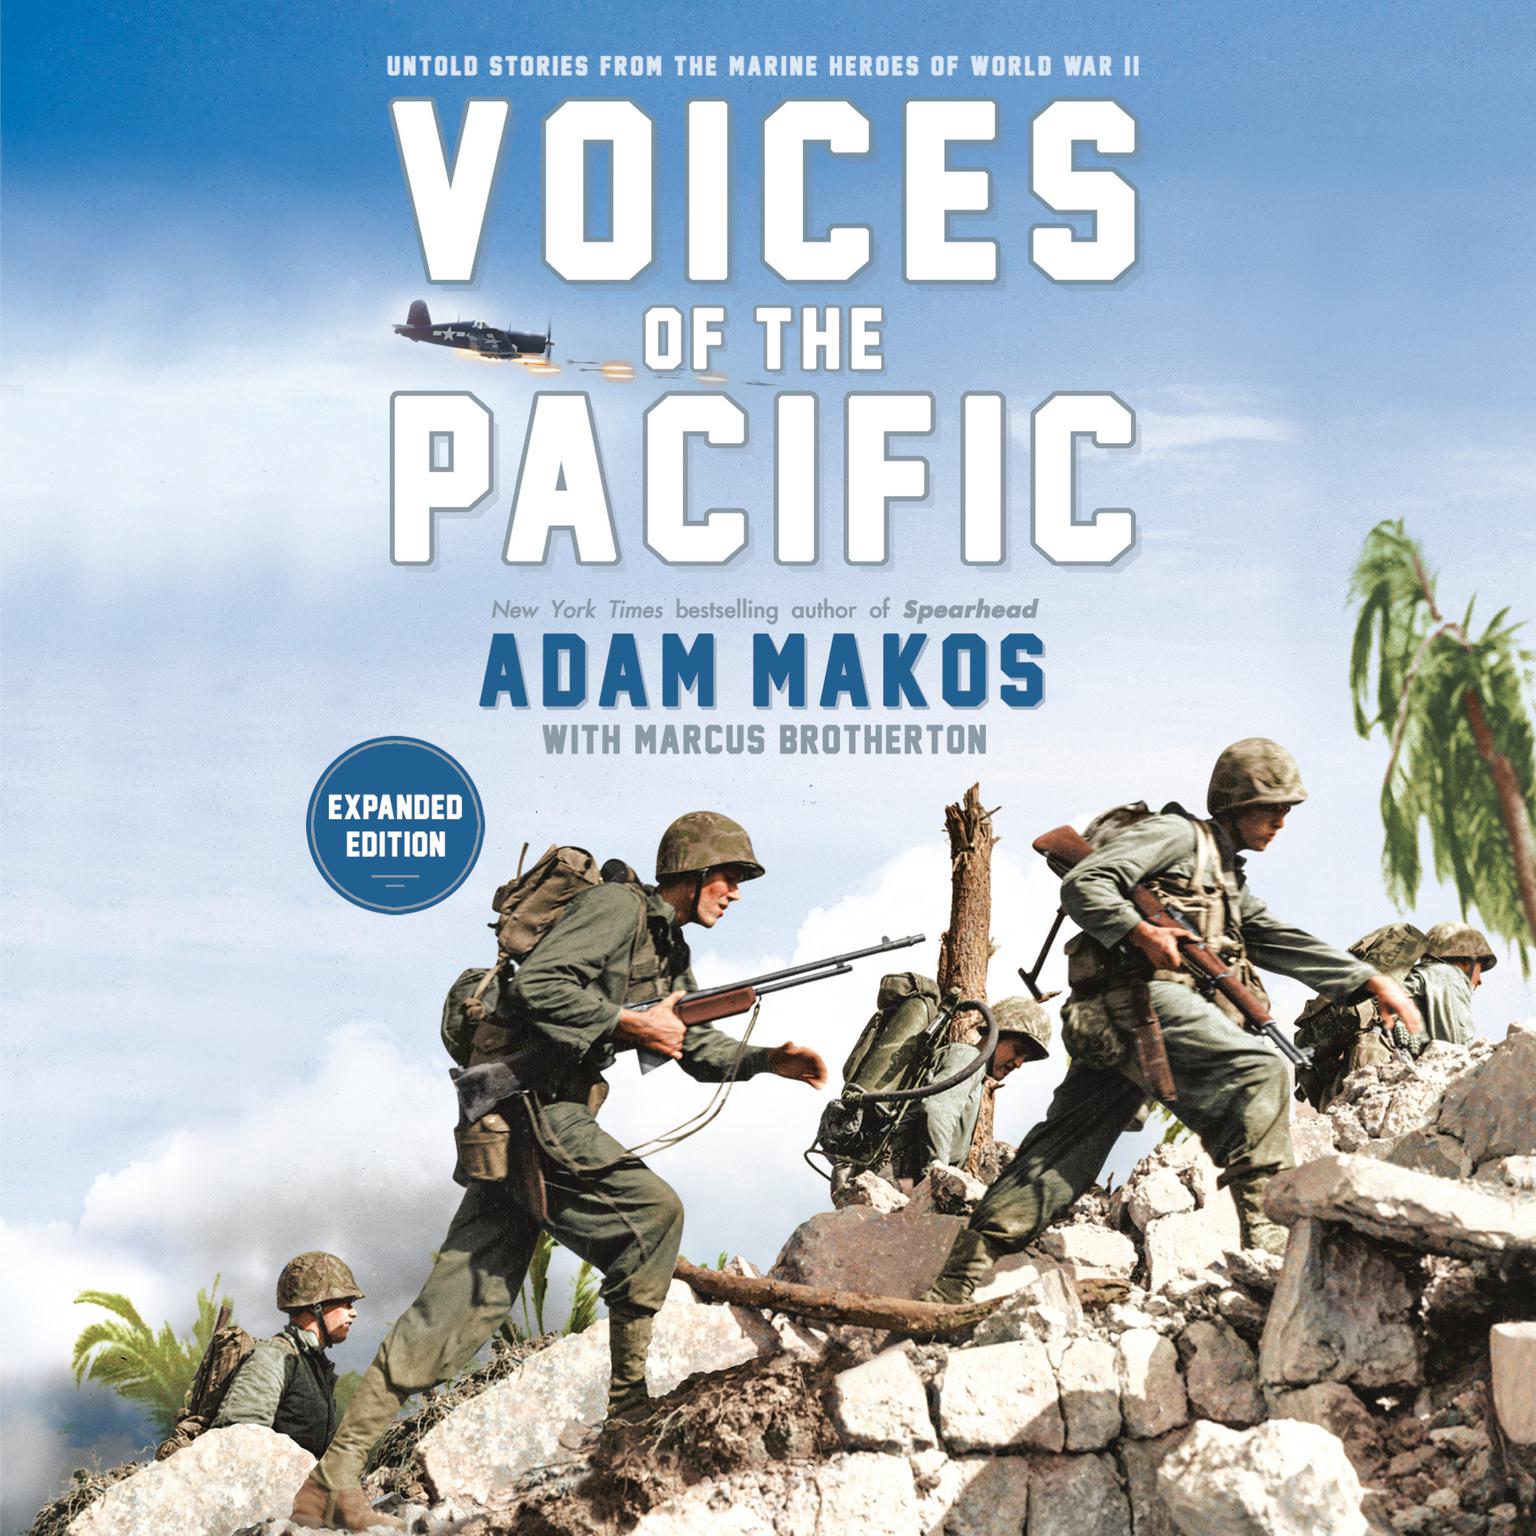 Voices of the Pacific, Expanded Edition: Untold Stories from the Marine Heroes of World War II Audiobook, by Adam Makos